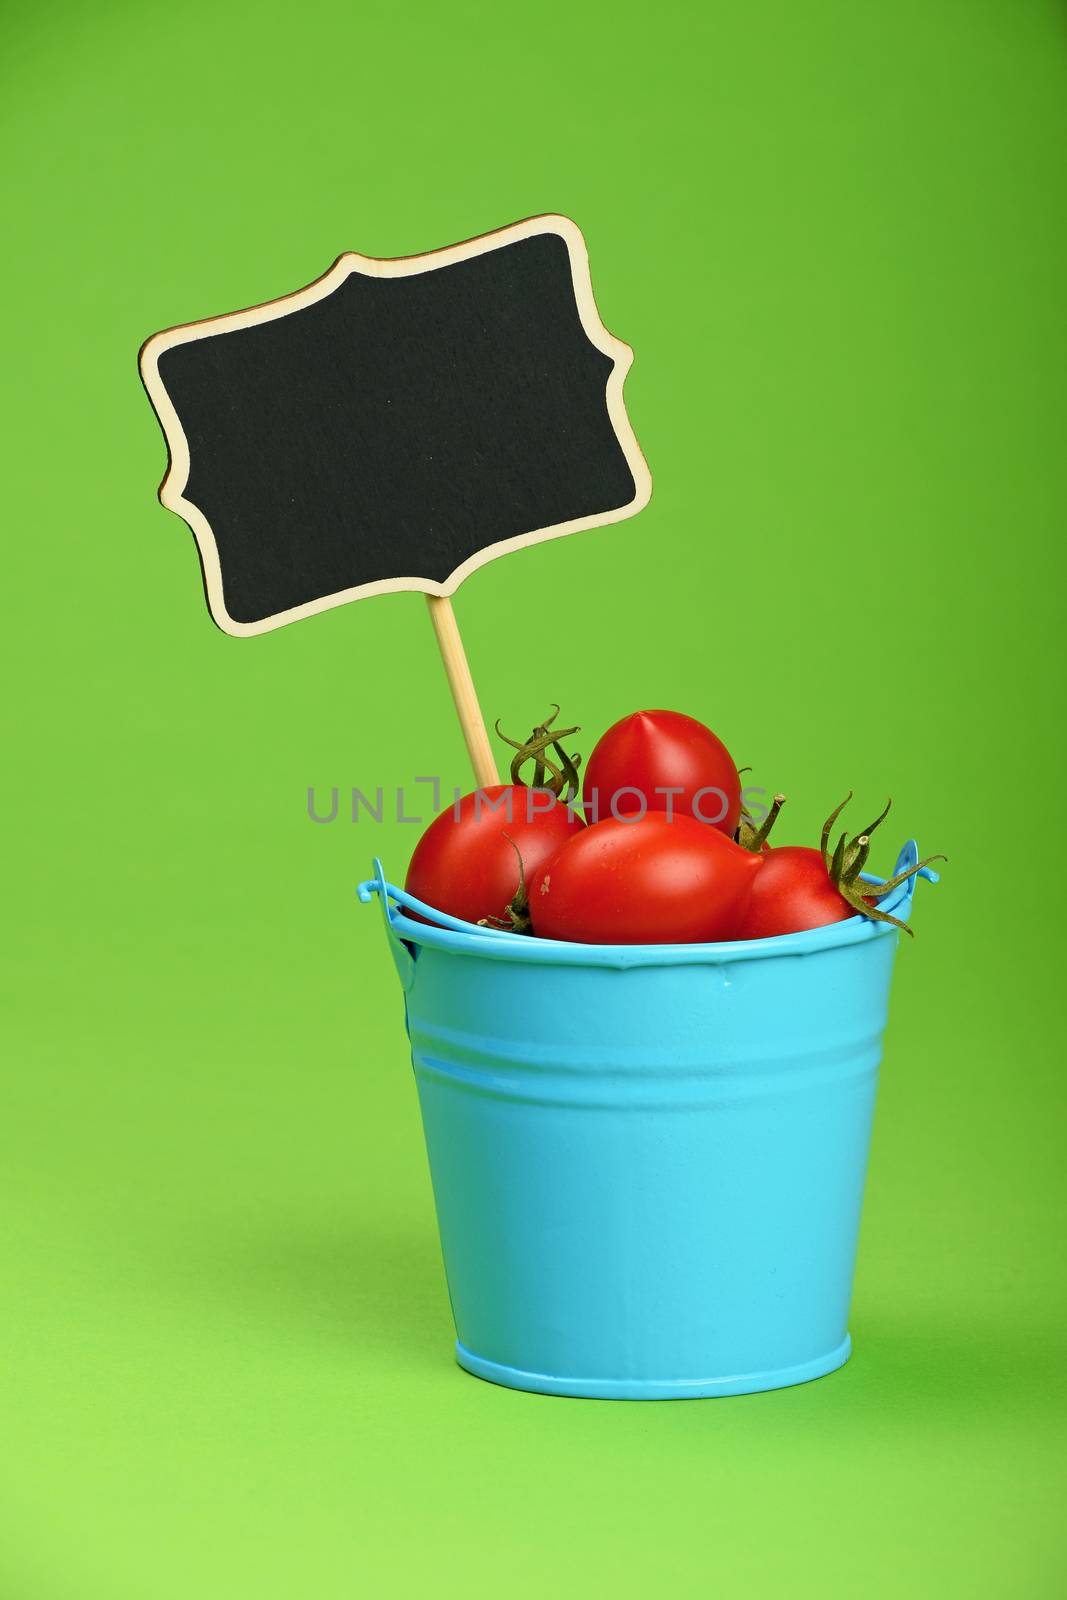 Small disproportional blue bucket of red cherry tomatoes and black chalkboard sign over green background, close up